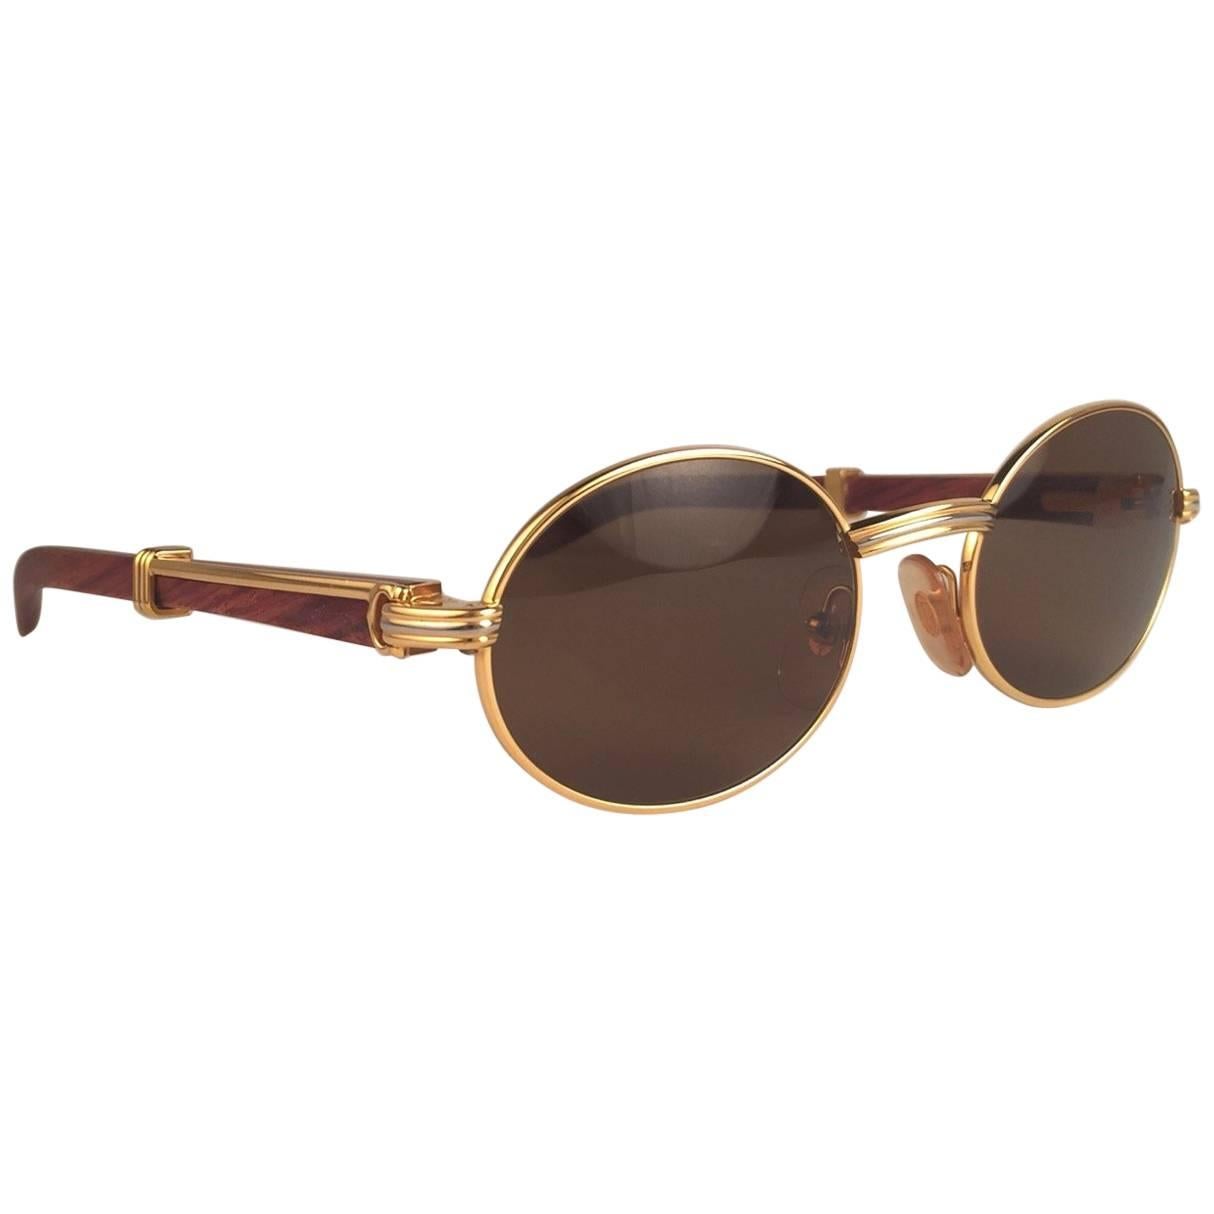 New Original Rare Yellow and White Gold 1992 Cartier classy Sully Sunglasses with rosewood temples and honey brown spotless uv protection lenses.  
Frame with the front and sides in yellow gold.  
All hallmarks.  Gold Cartier signs on the ear